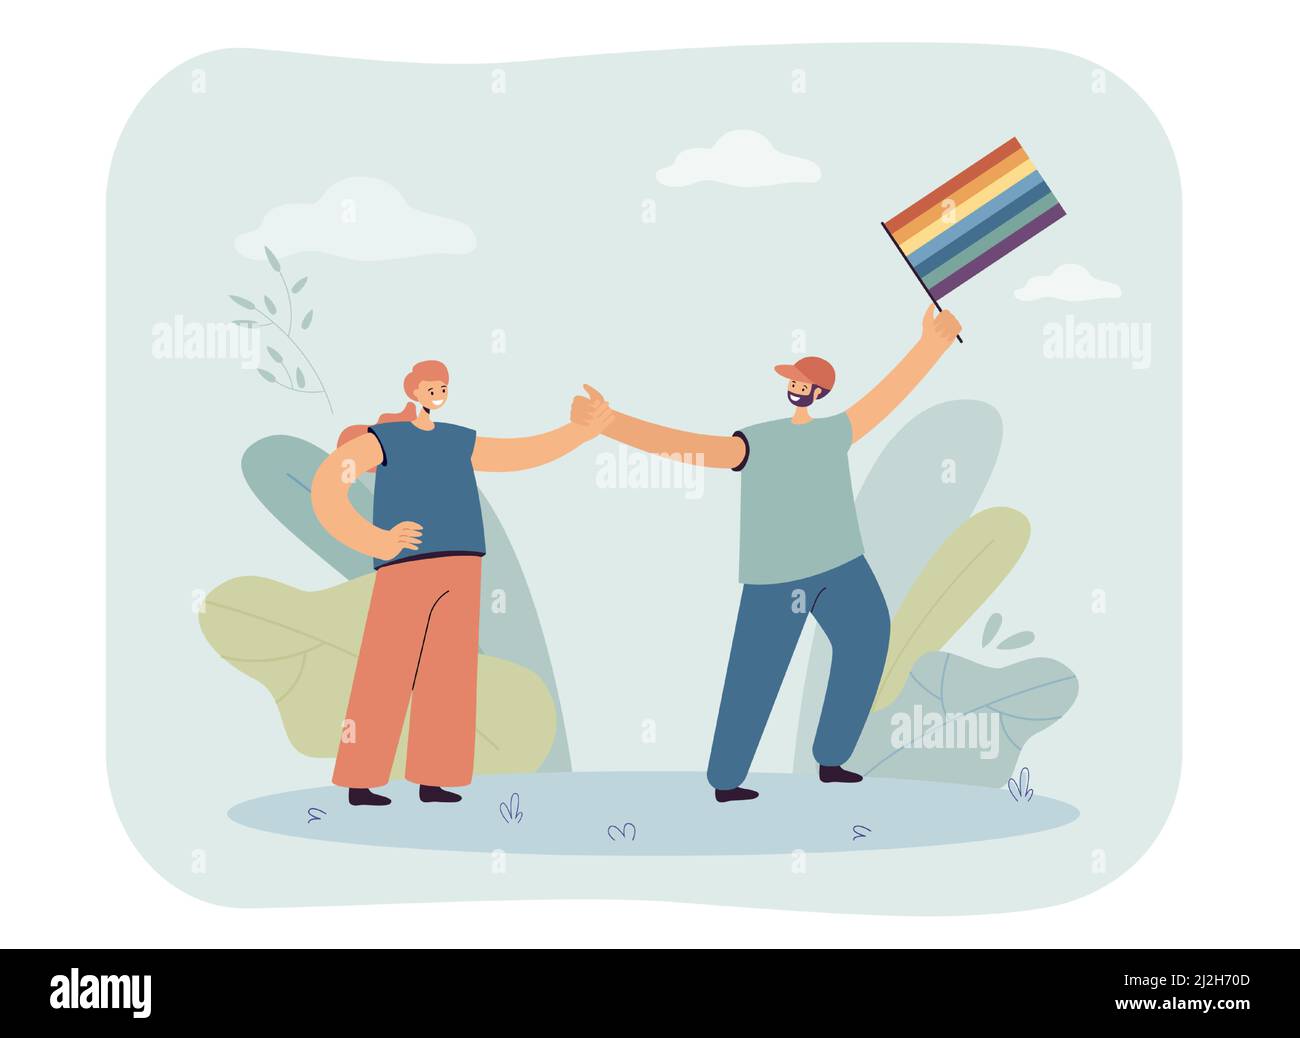 Happy couple supporting LGBT community. Male character holding rainbow flag flat vector illustration. LGBT, equality, love, human rights concept for b Stock Vector